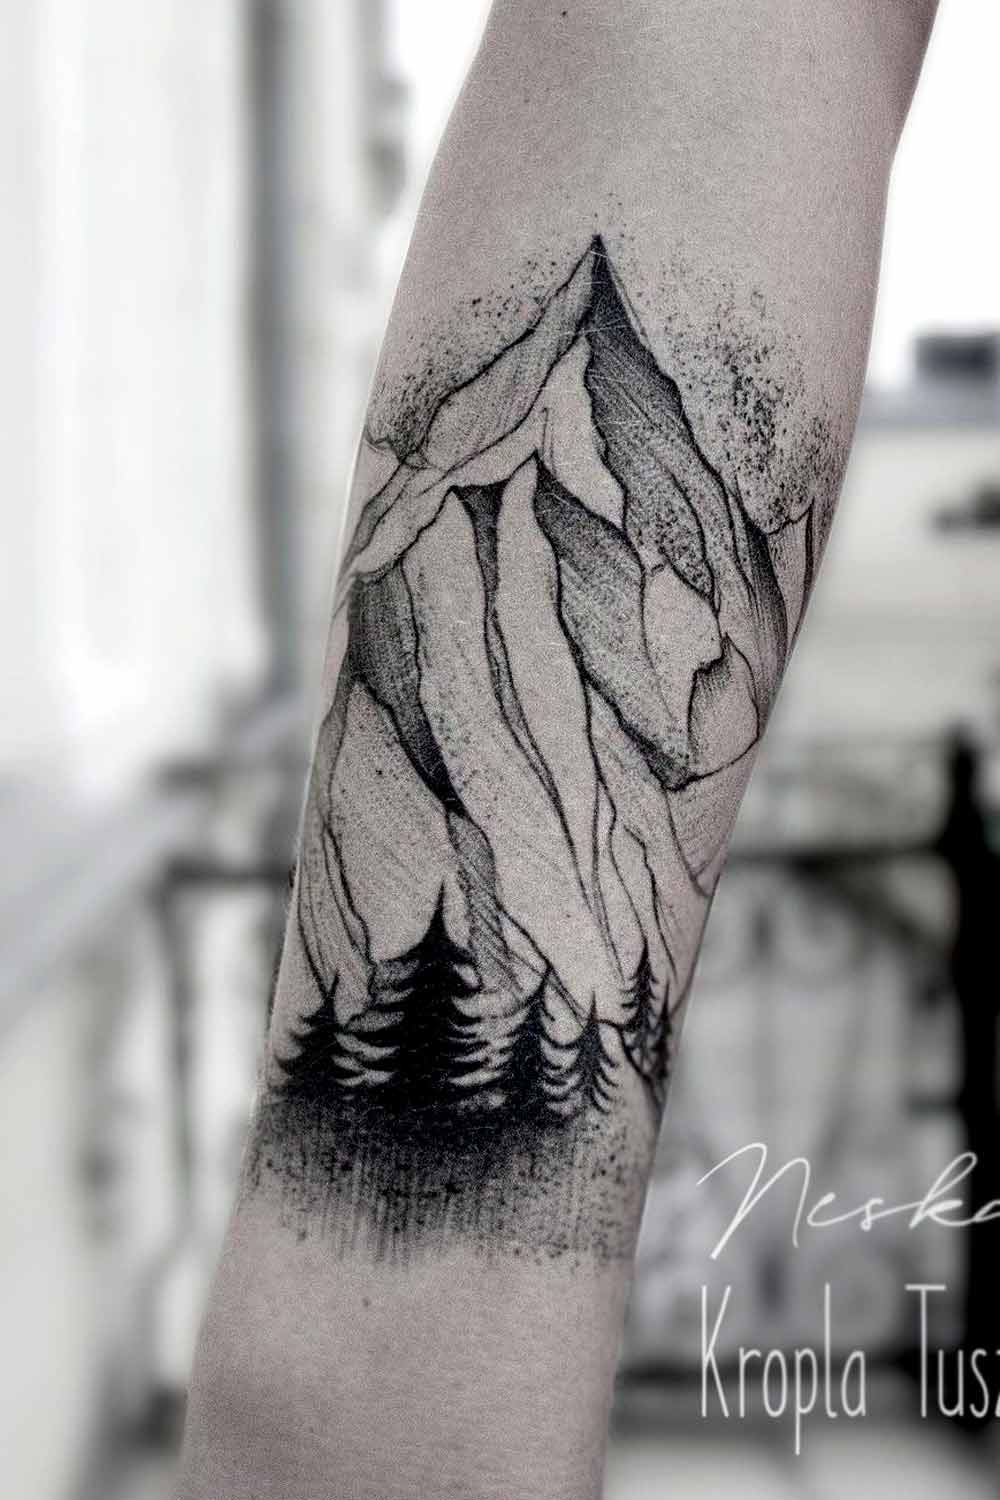 225 Coolest Forearm Tattoos For Men in 2023